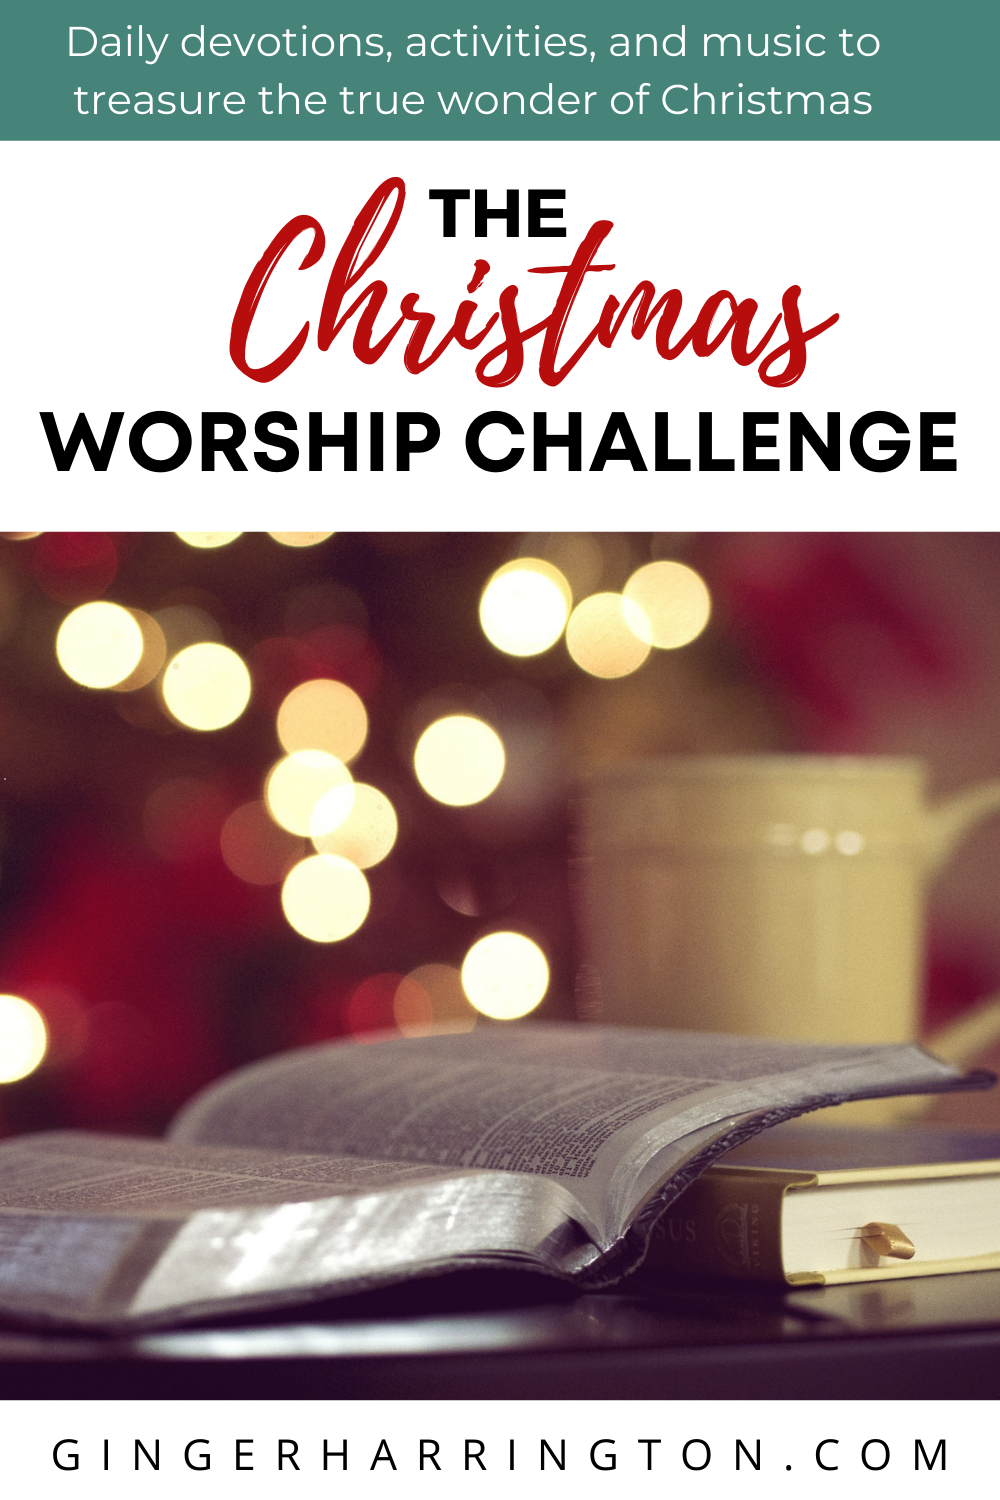 Discover the holy in your holiday with The Christmas Worship Challenge. Daily devotions, activities, and music to focus on Christ first this Christmas. Biblical wisdom for Christian women to grow spiritually this Christmas.